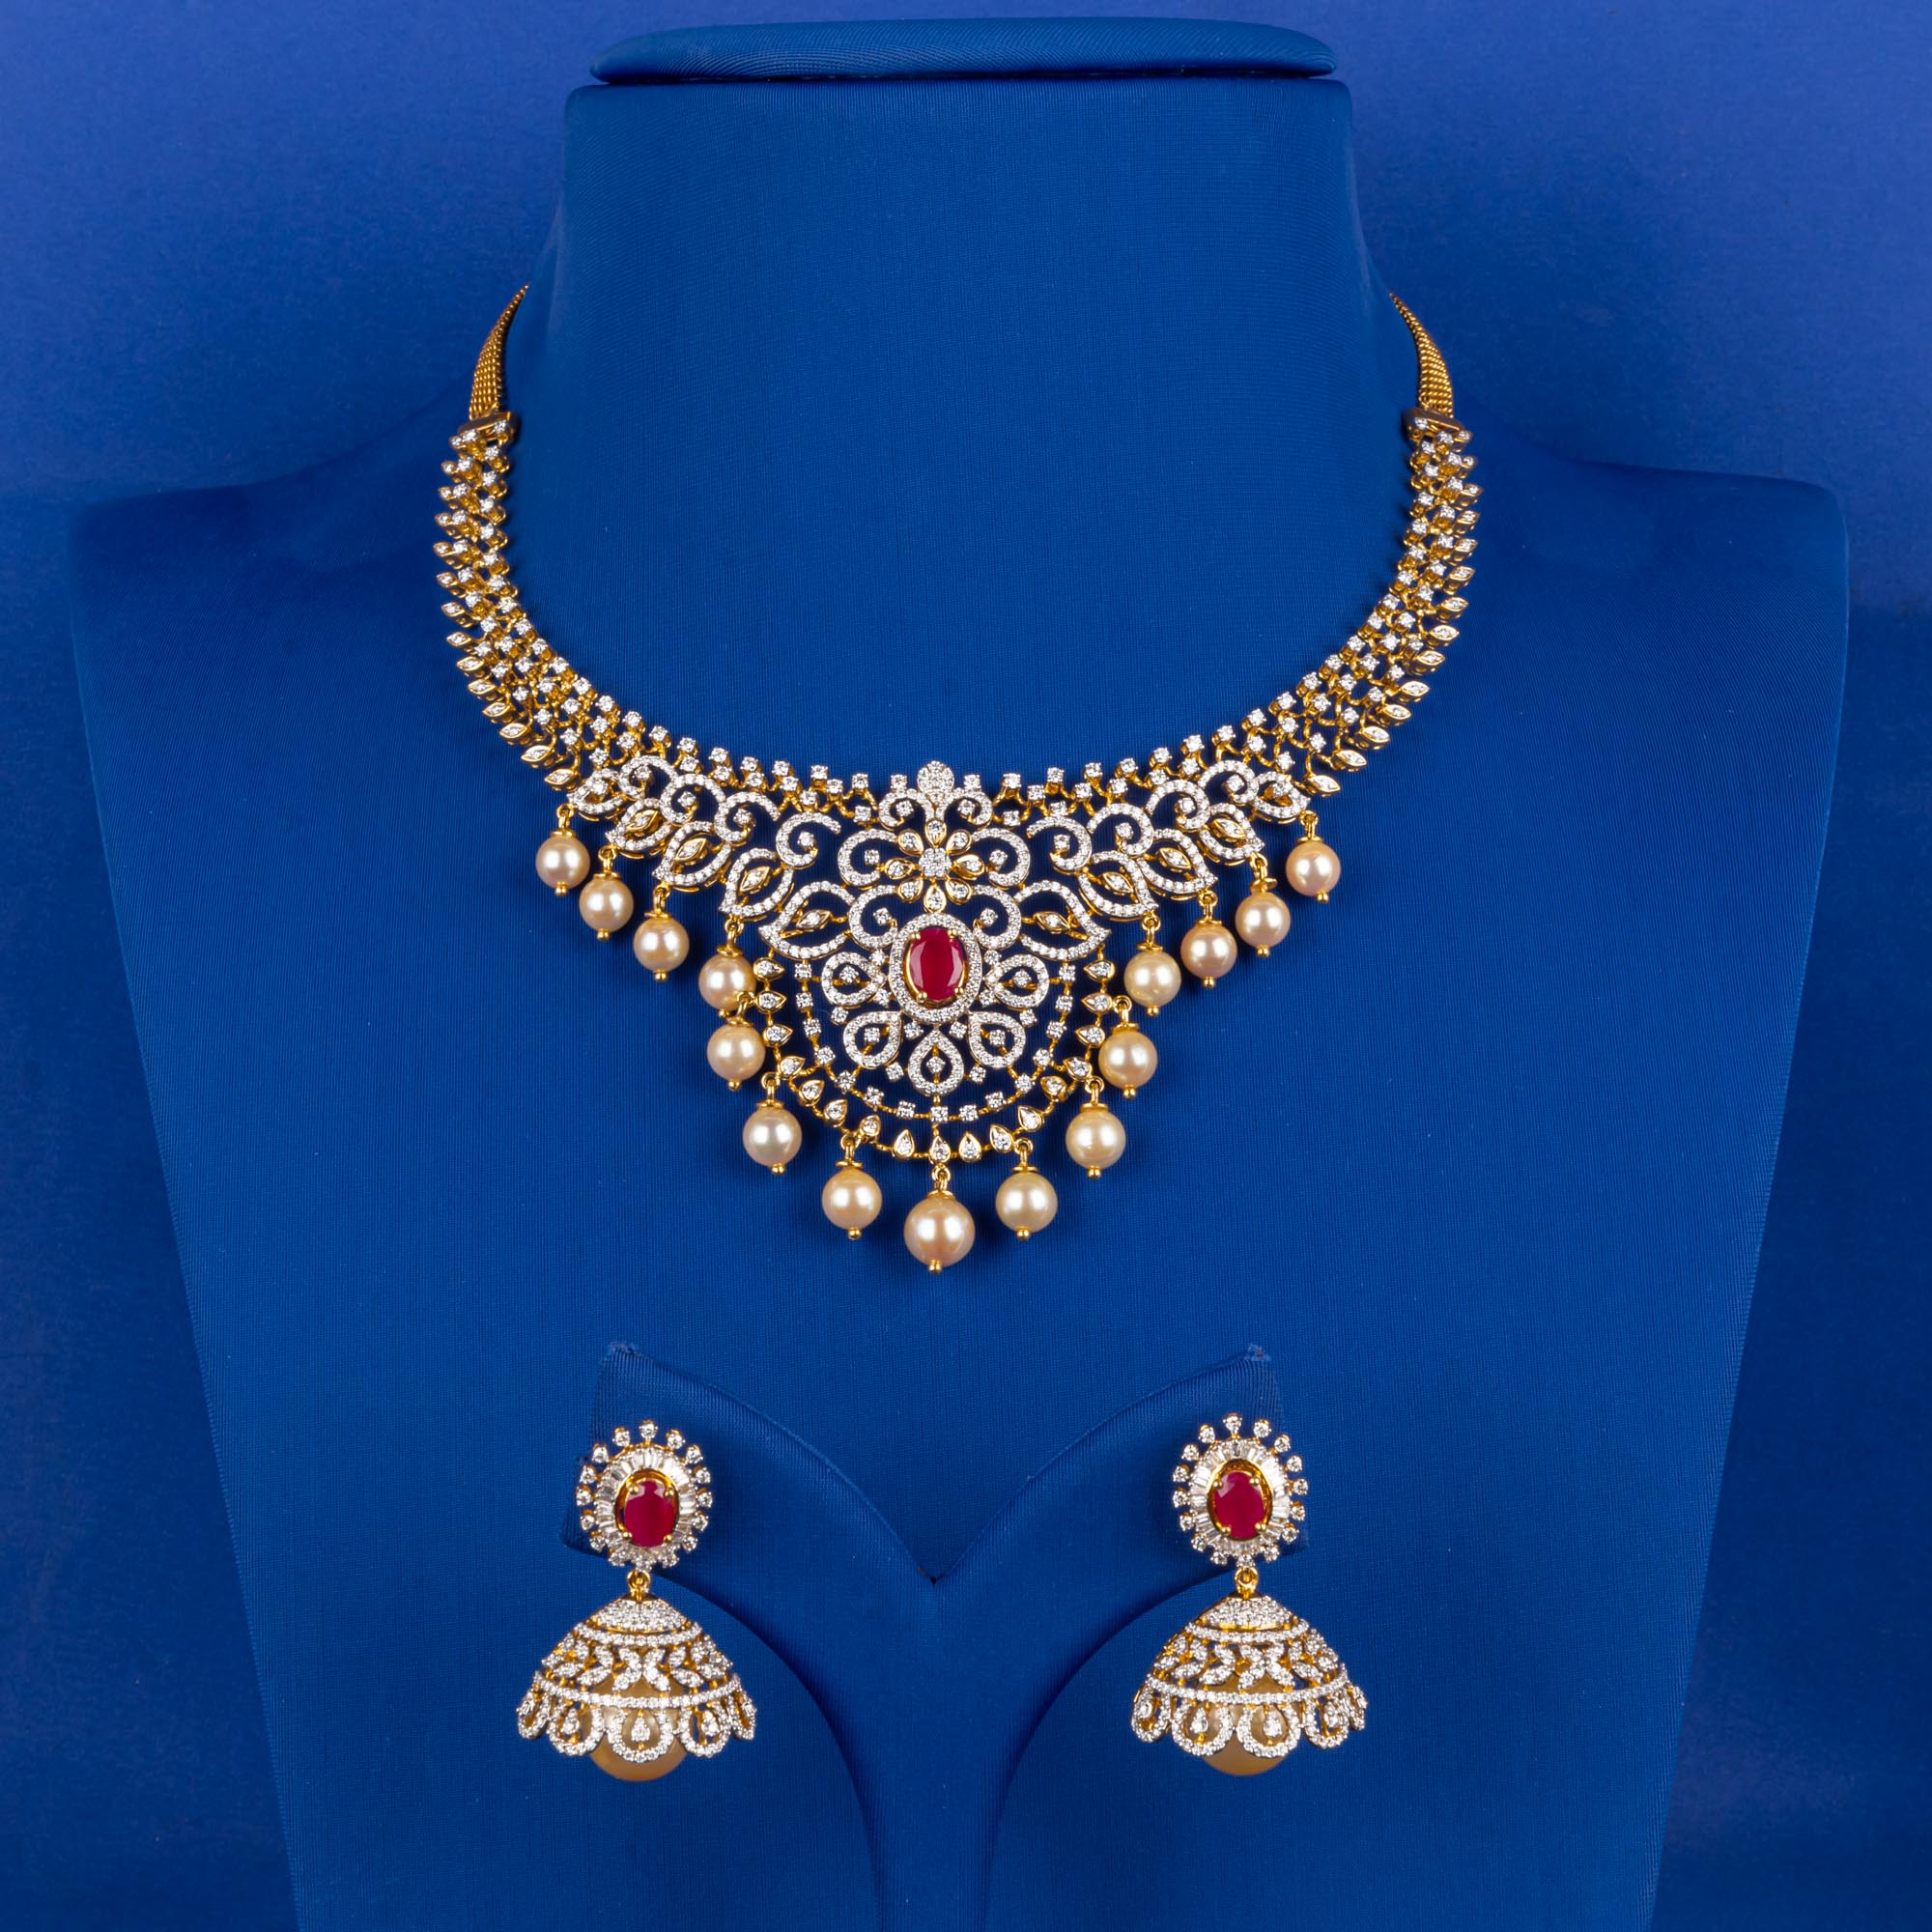 Timeless Treasures: Handmade 18K Yellow Gold Diamond Necklace and Earrings with Pearls and Interchangeable Center Stone (Emerald, Ruby, and Sapphire)